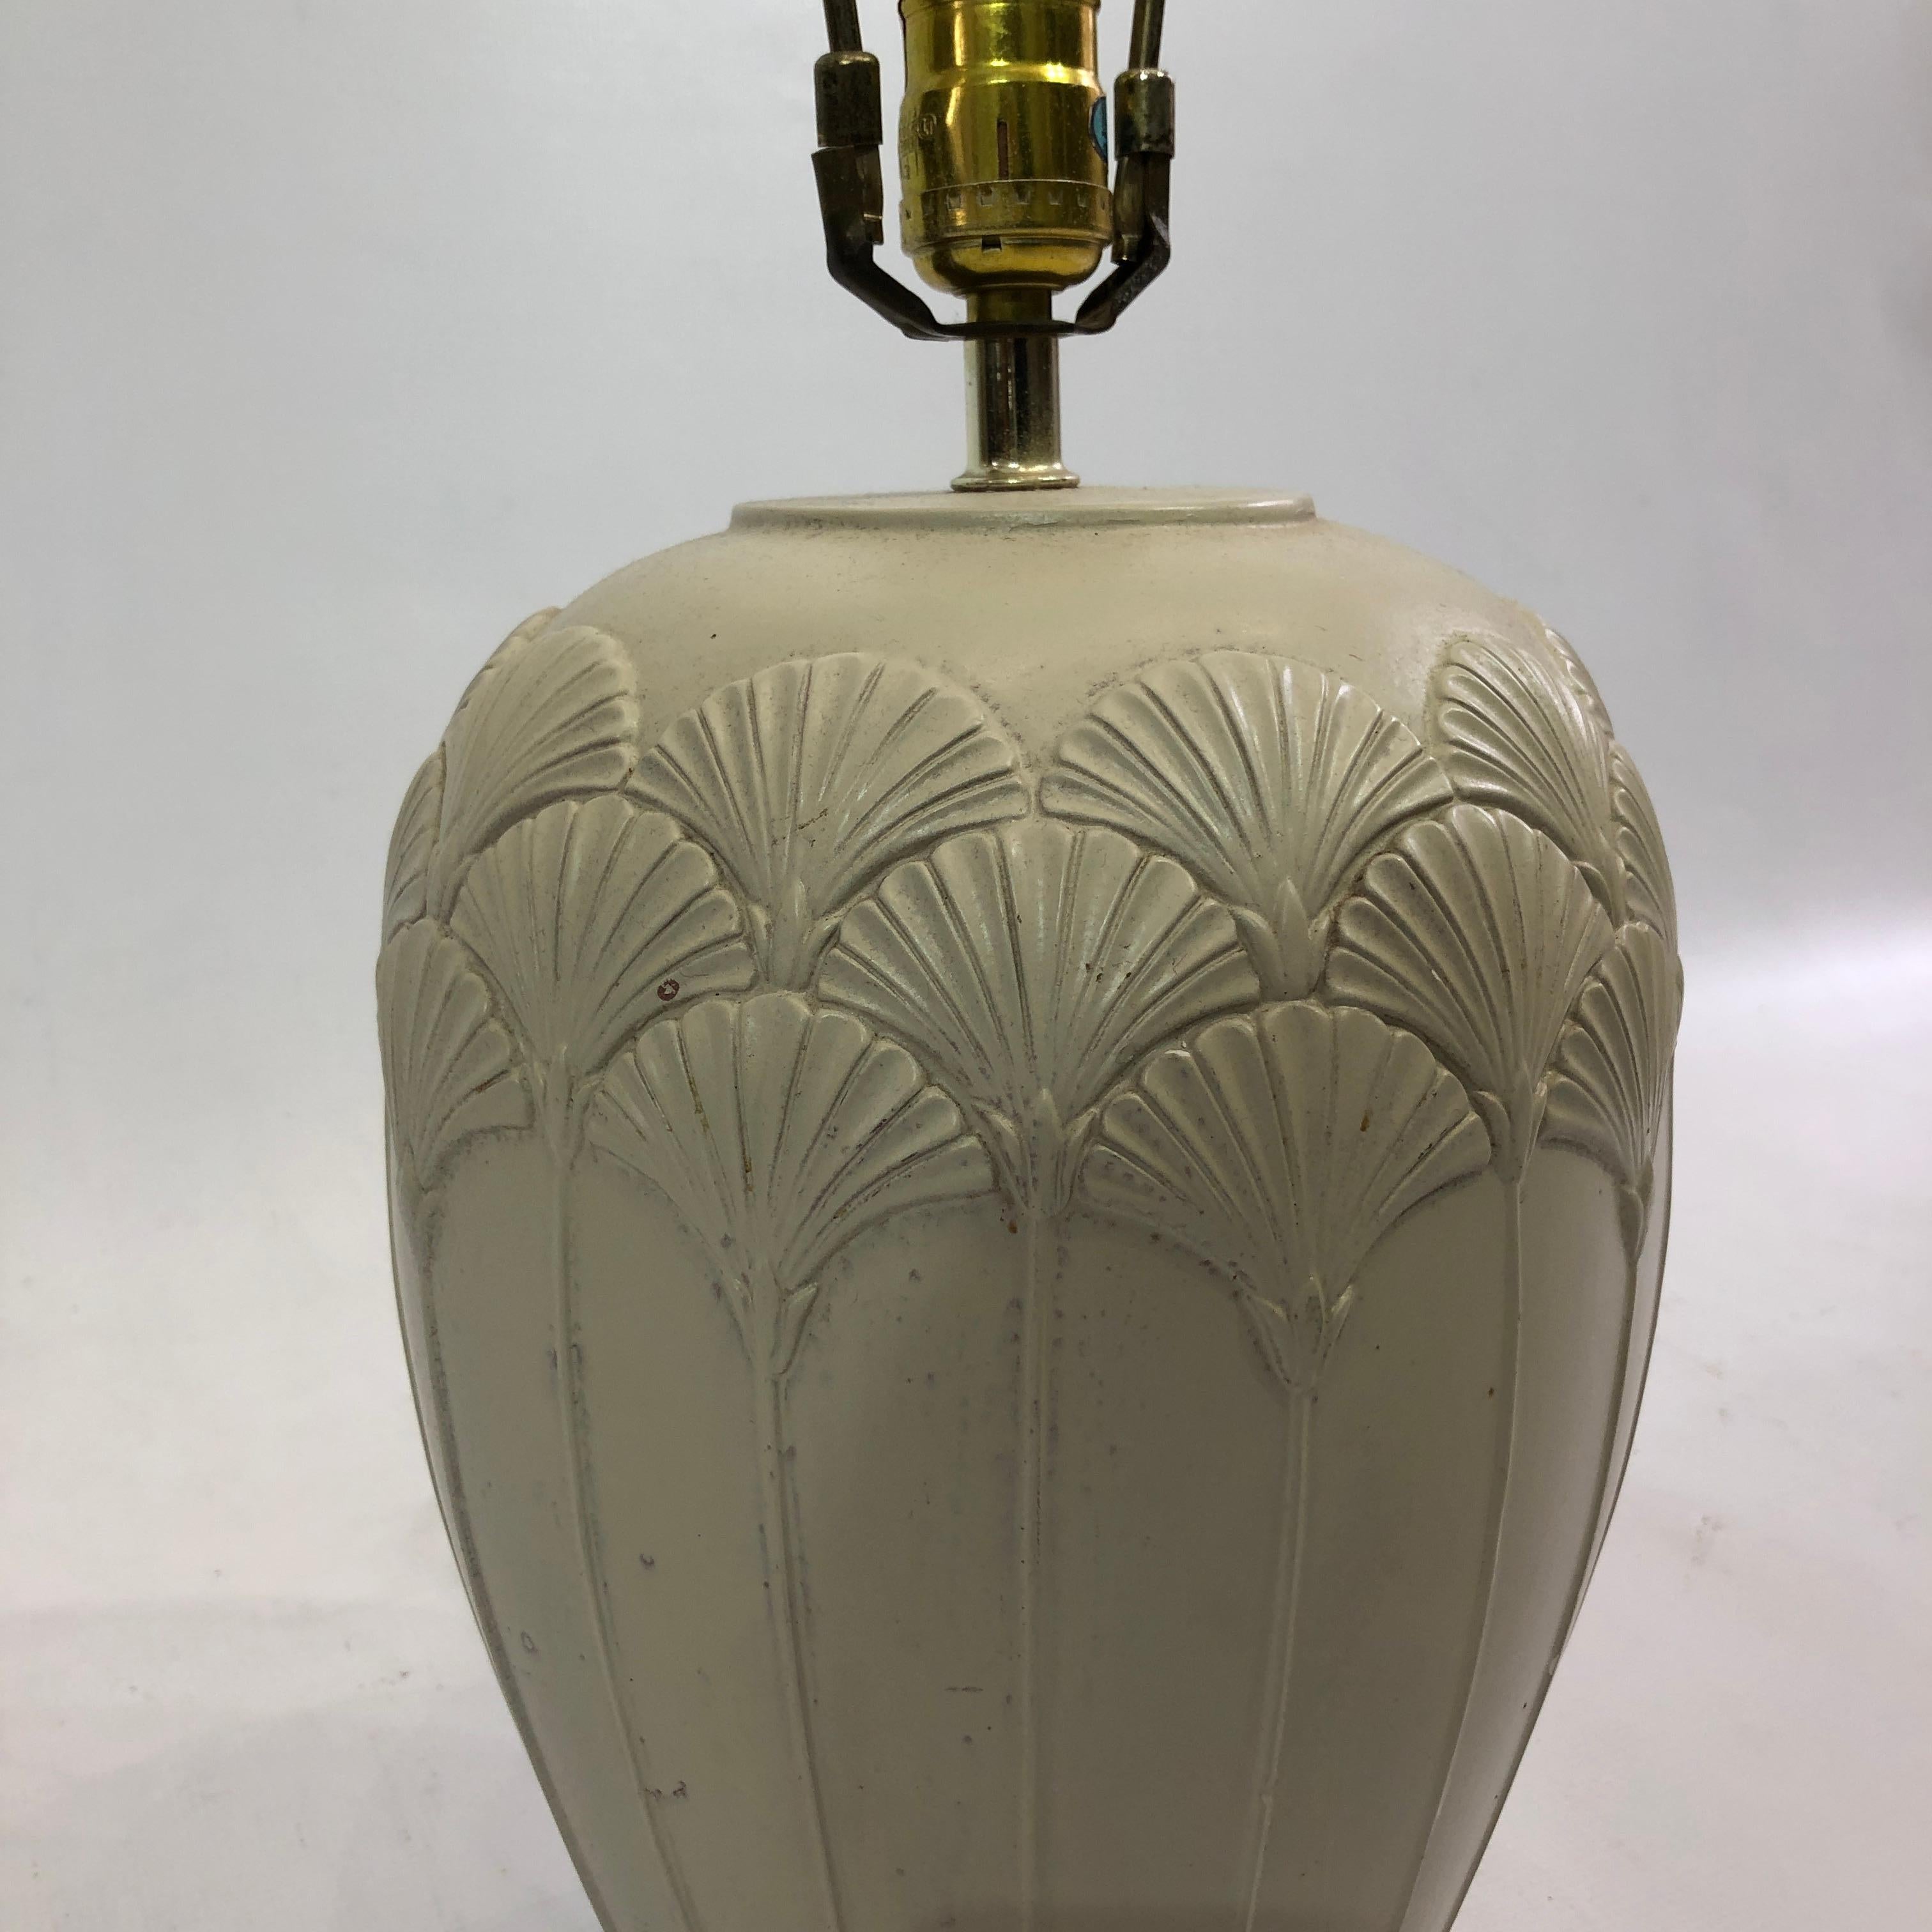 Cream Ceramic Shell Table Lamp 1980s USA Vintage Art Deco Miami Post Modern In Good Condition For Sale In London, GB